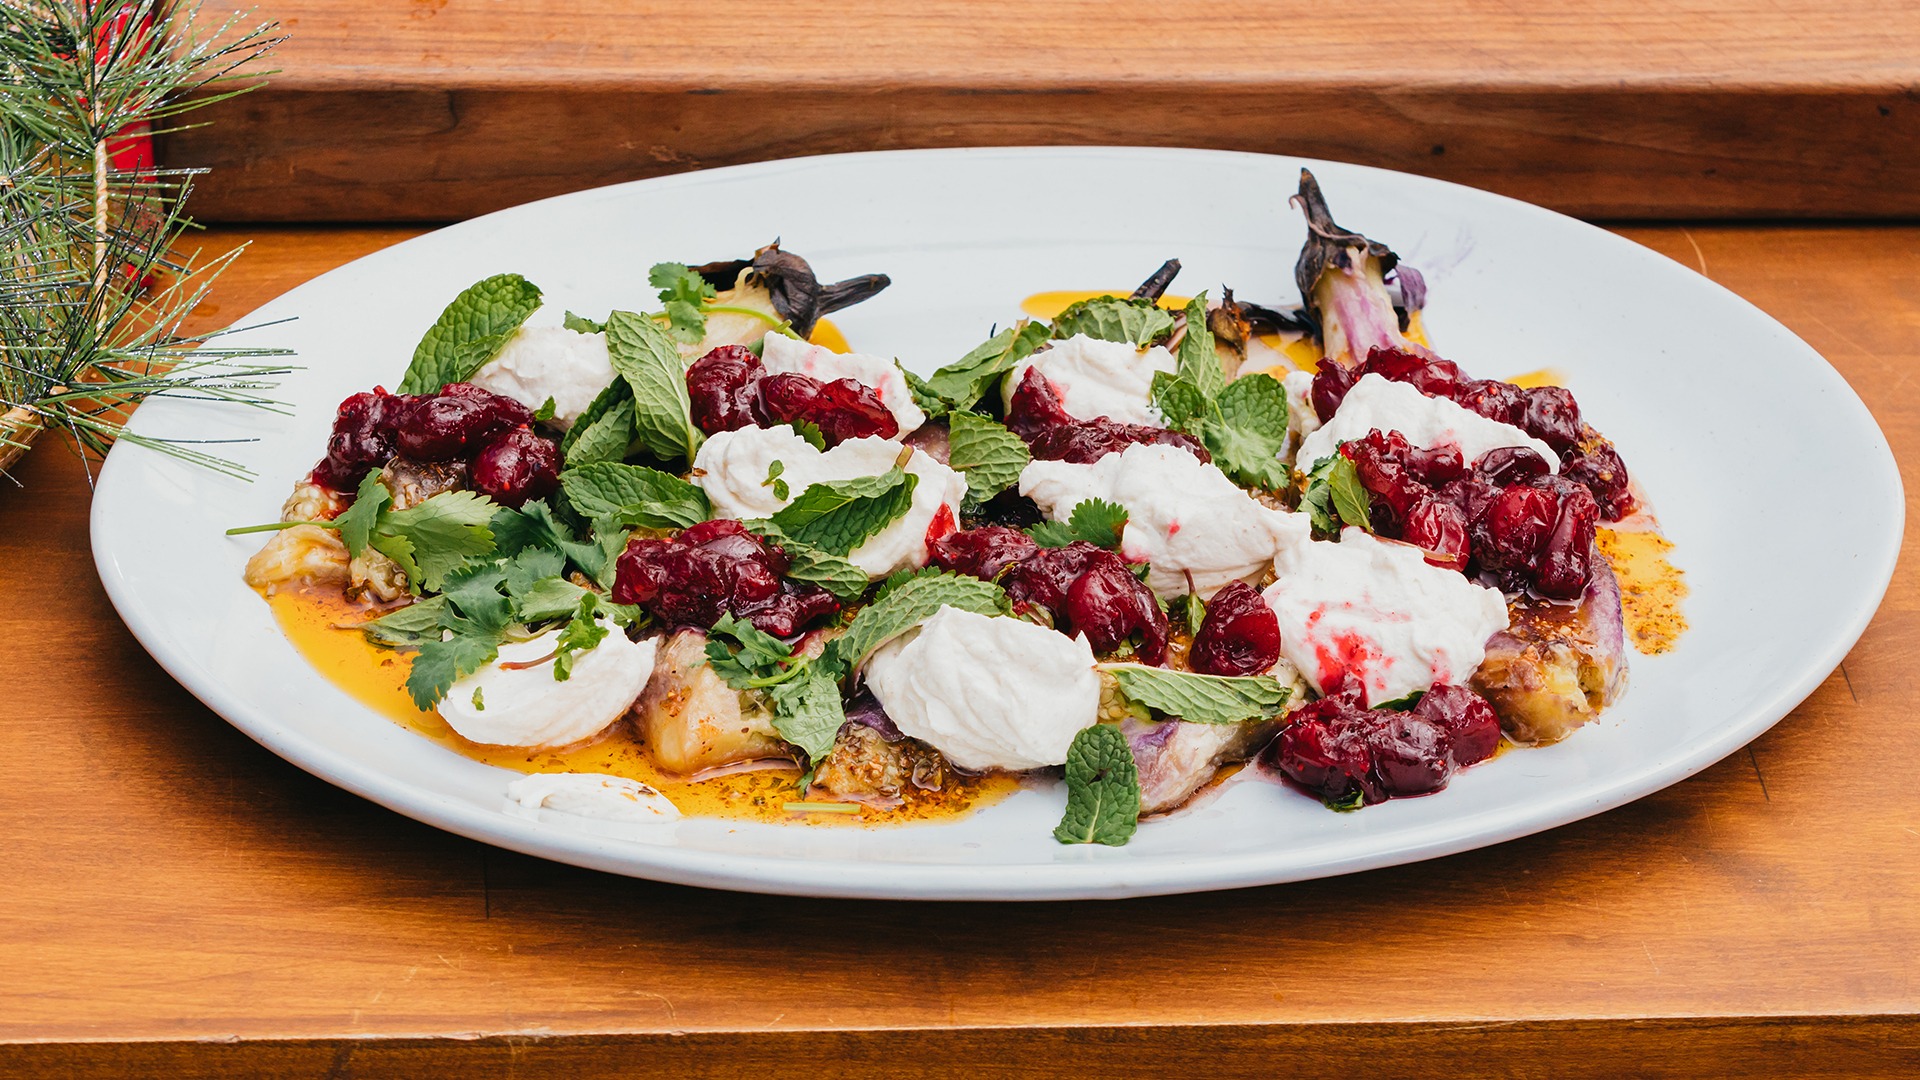 Roasted Eggplant with Herbed Labneh – Bonnie Plants